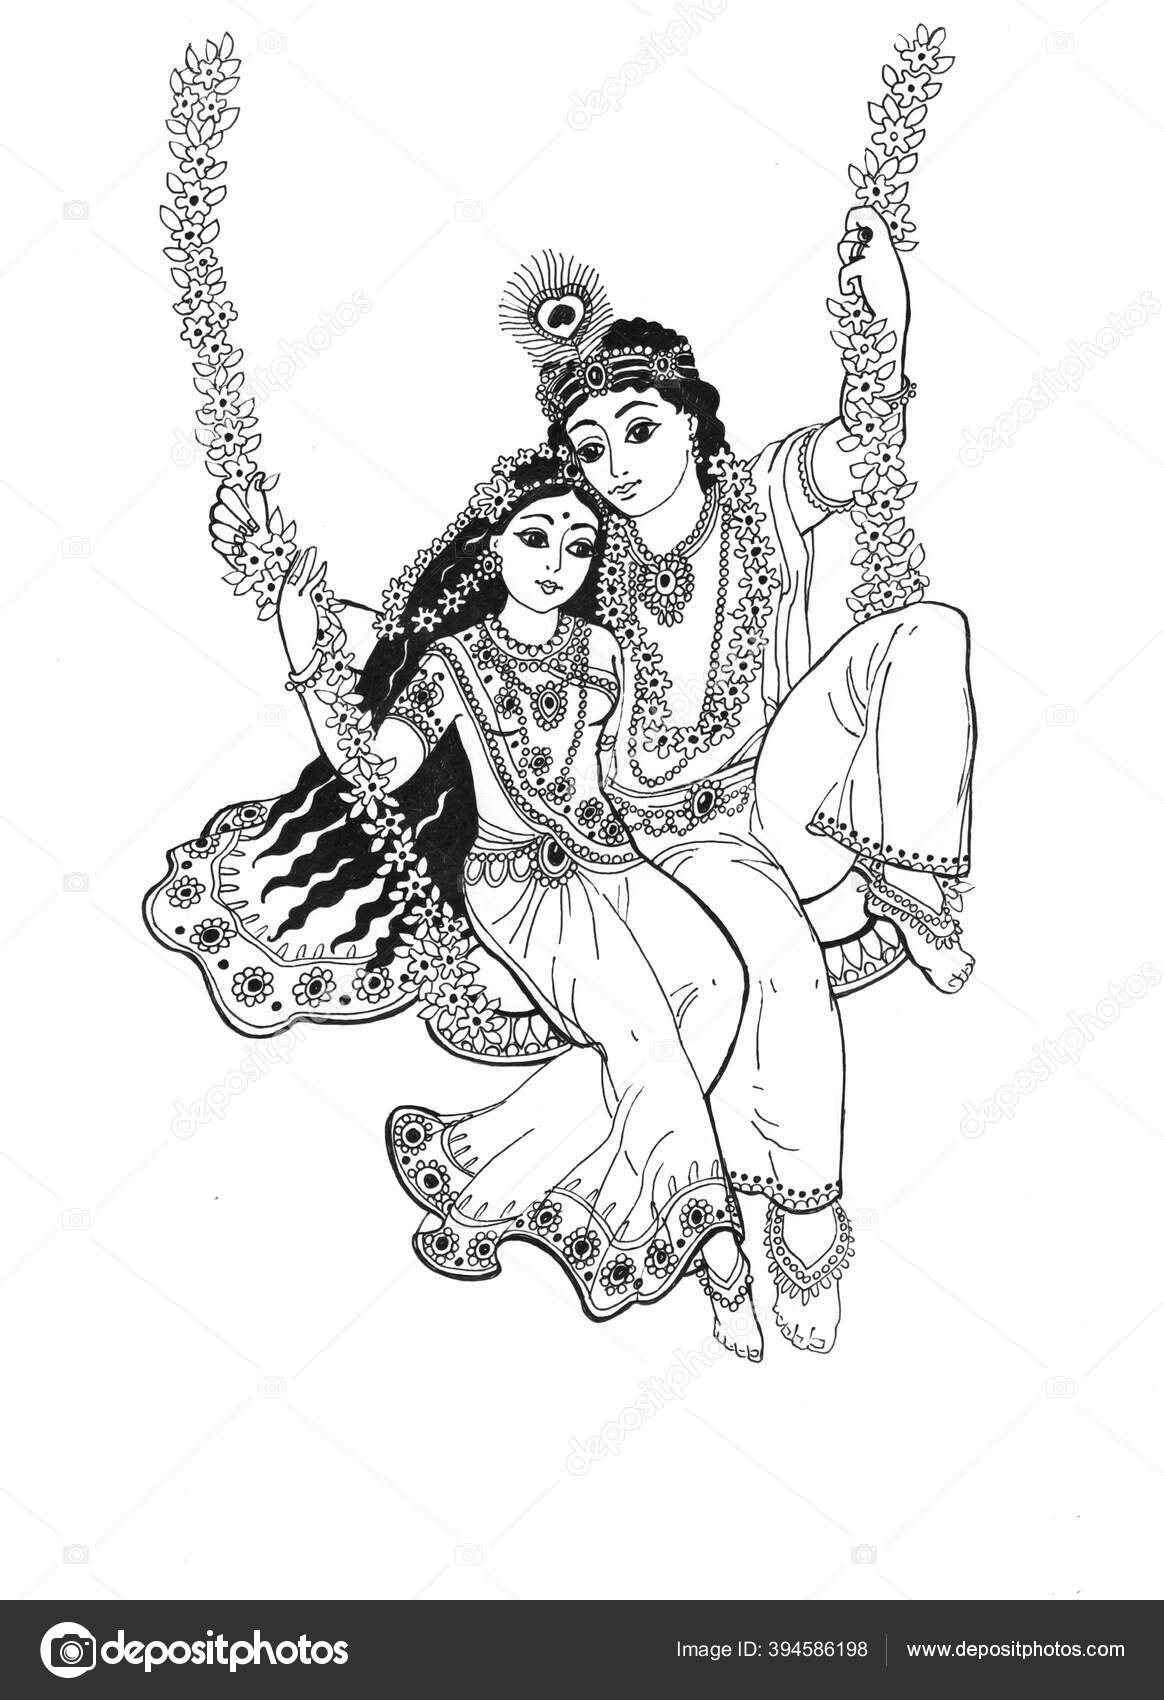 God Krishna Radha Swing Entwined Flowers Graphic Drawing White Background  Stock Photo by ©. 394586198